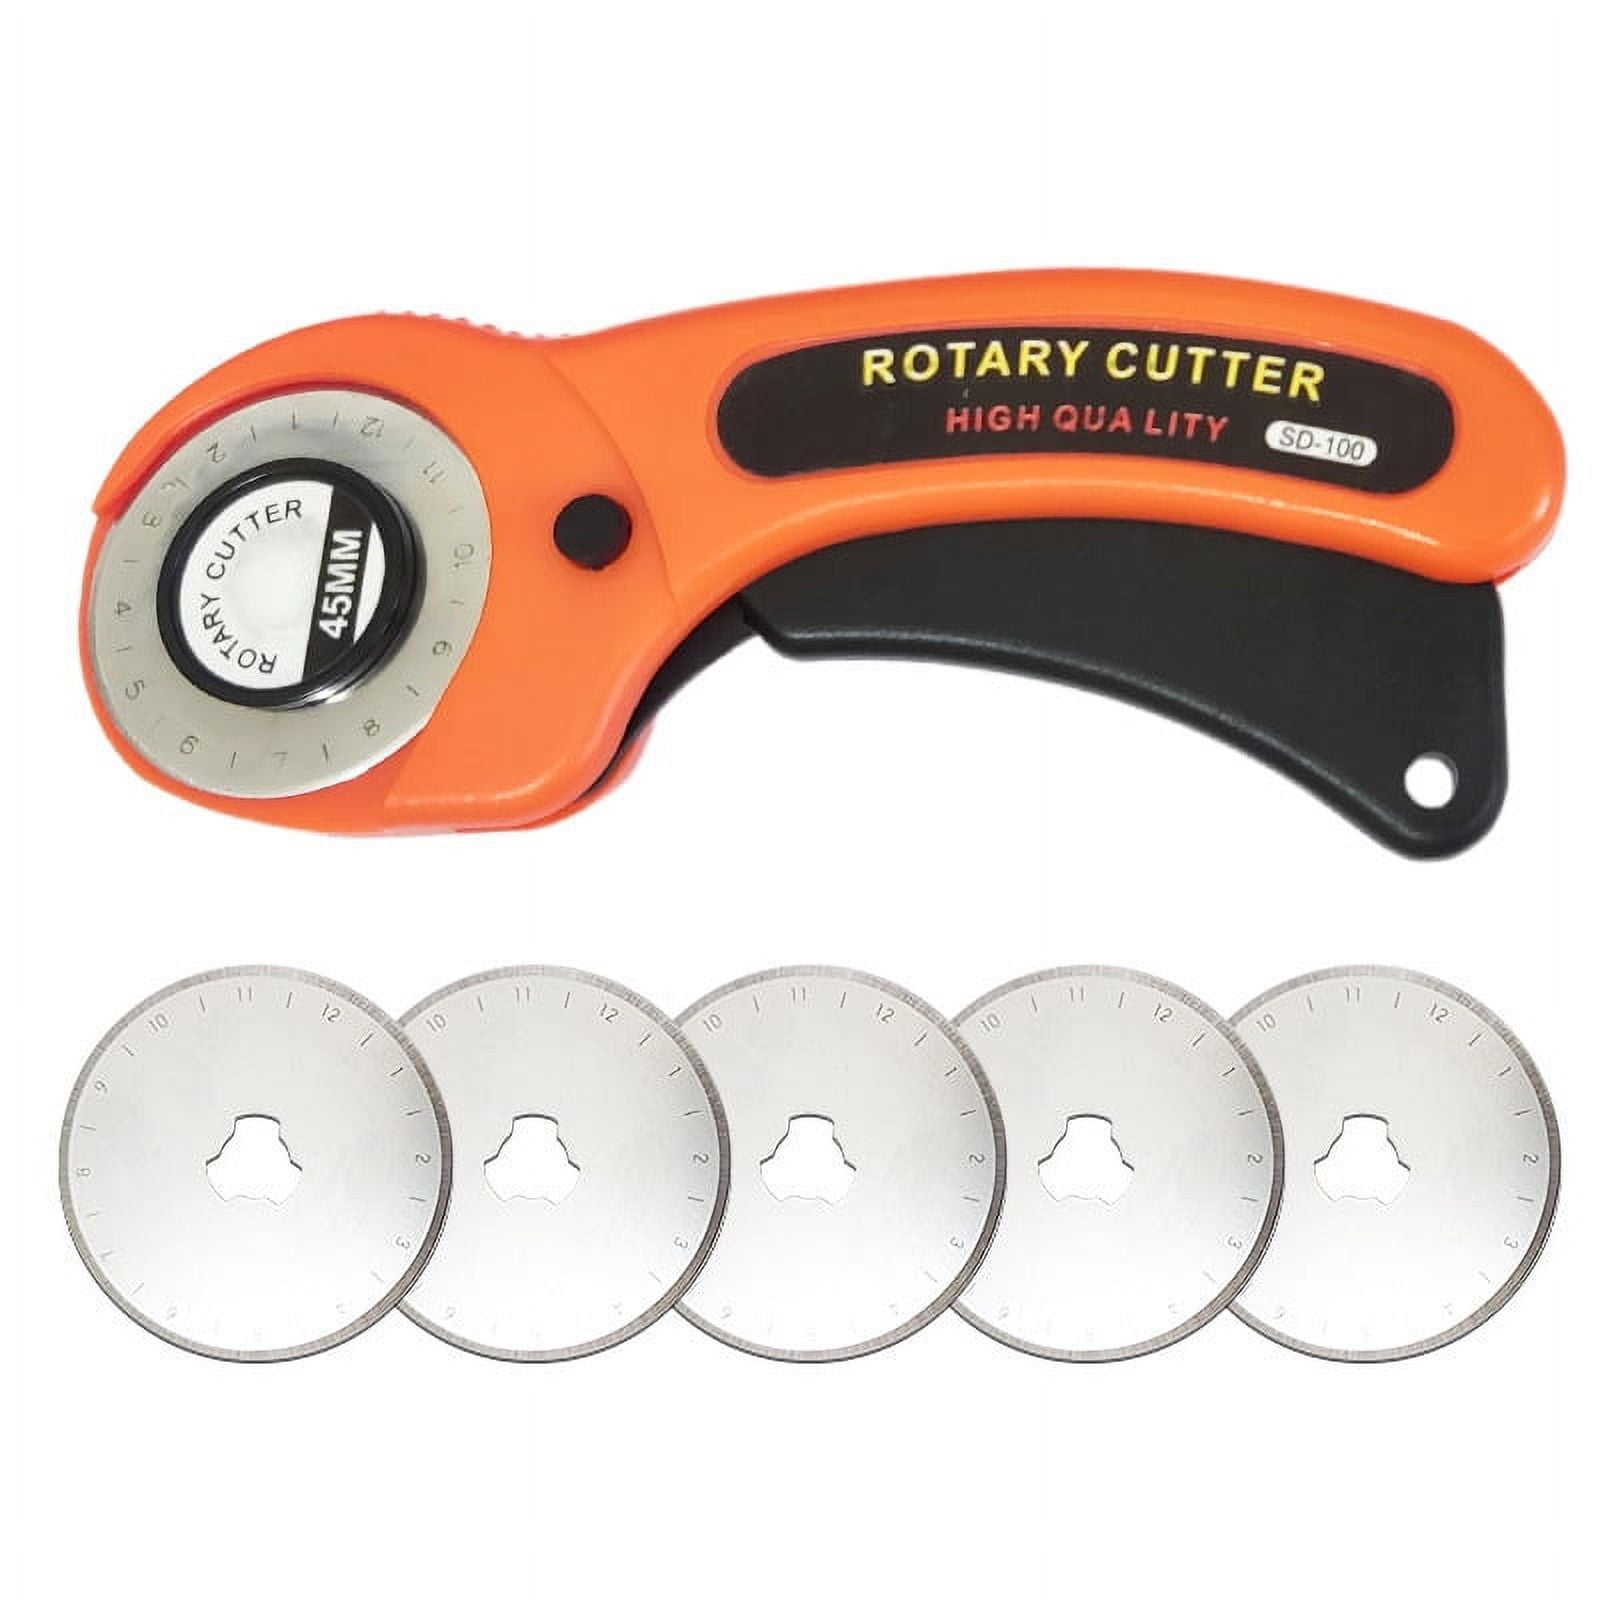 Rotary Cutter, Professional 45mm Rotary Fabric Cutter, Rotary Cutter for Fabric, Card Paper Sewing Quilting Roller Fabric Cutting Tailor Scissors